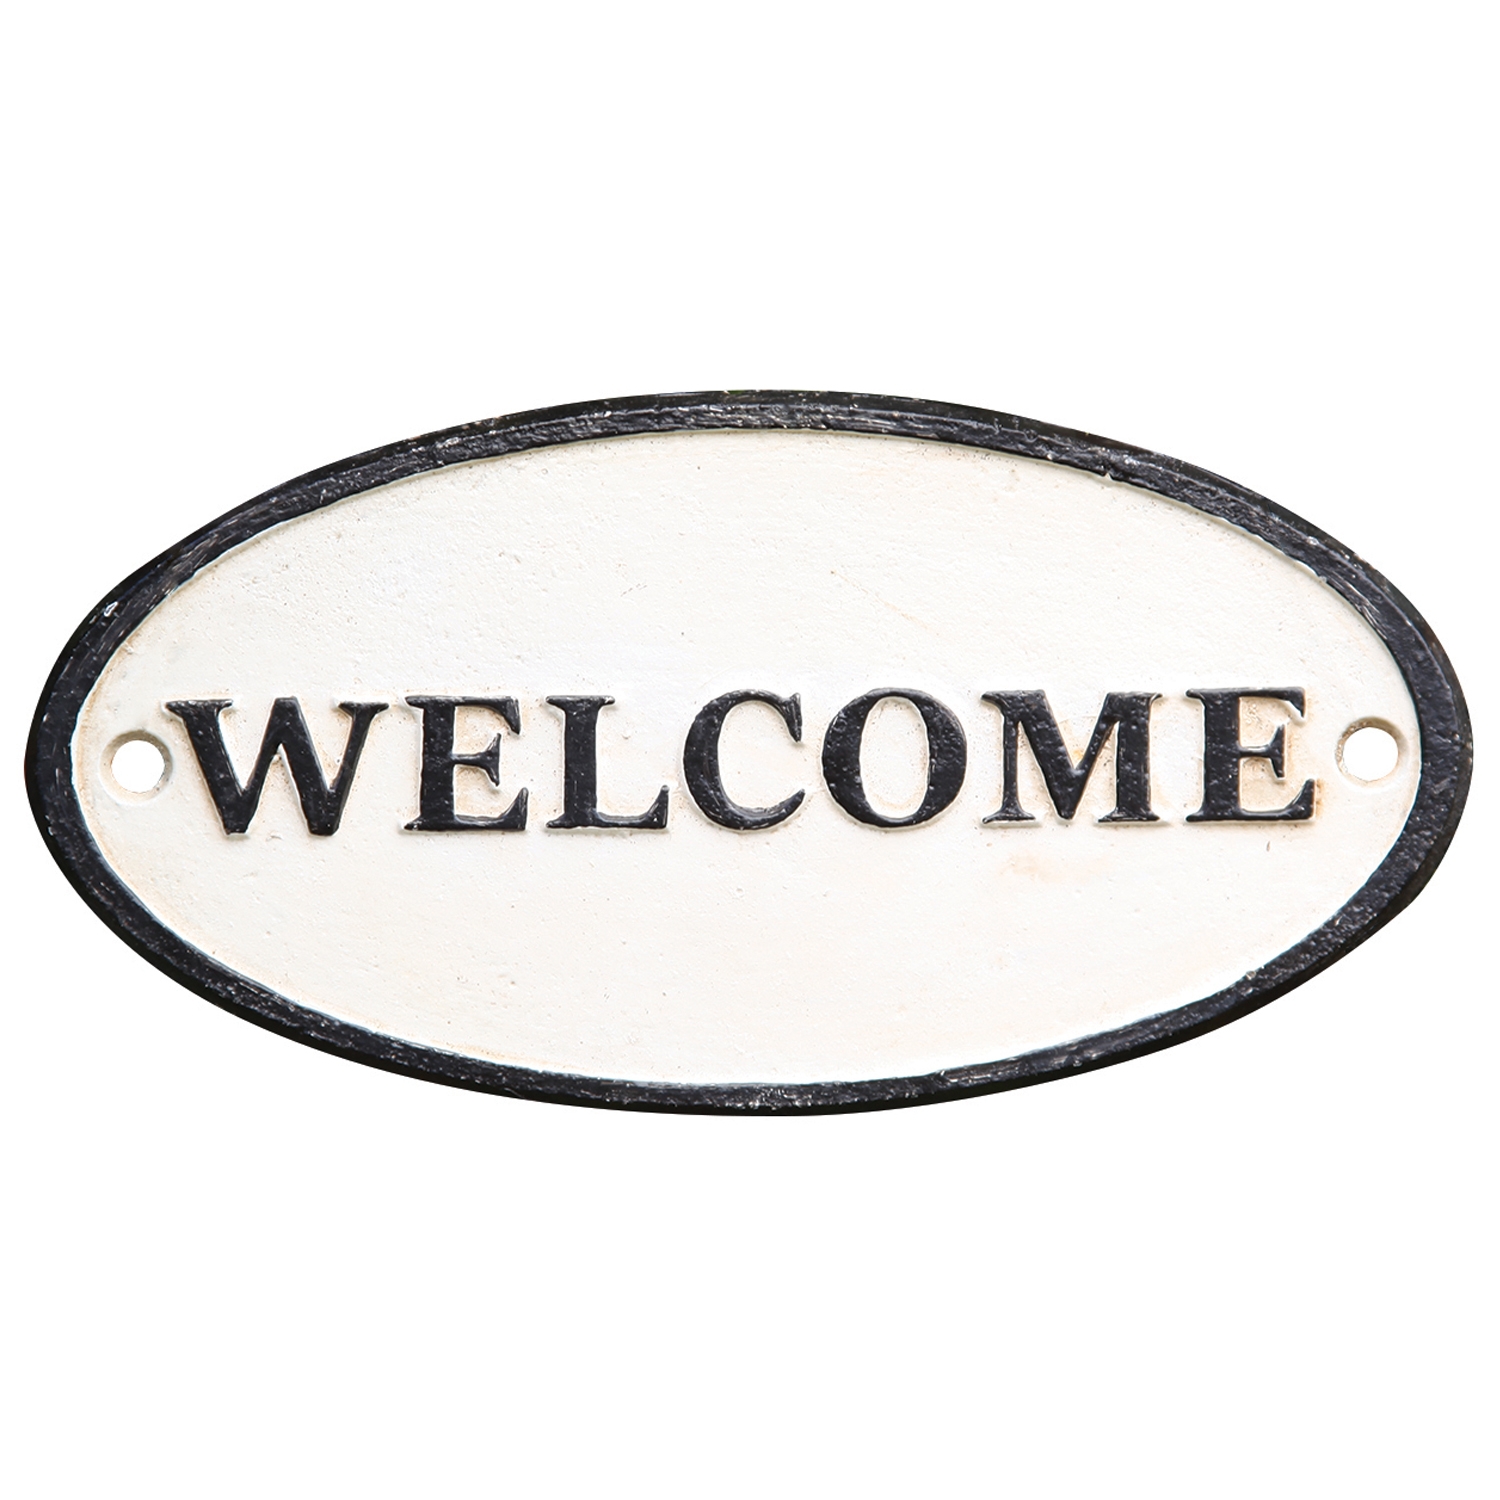 Welcome 7 inch cast Iron sign on white background